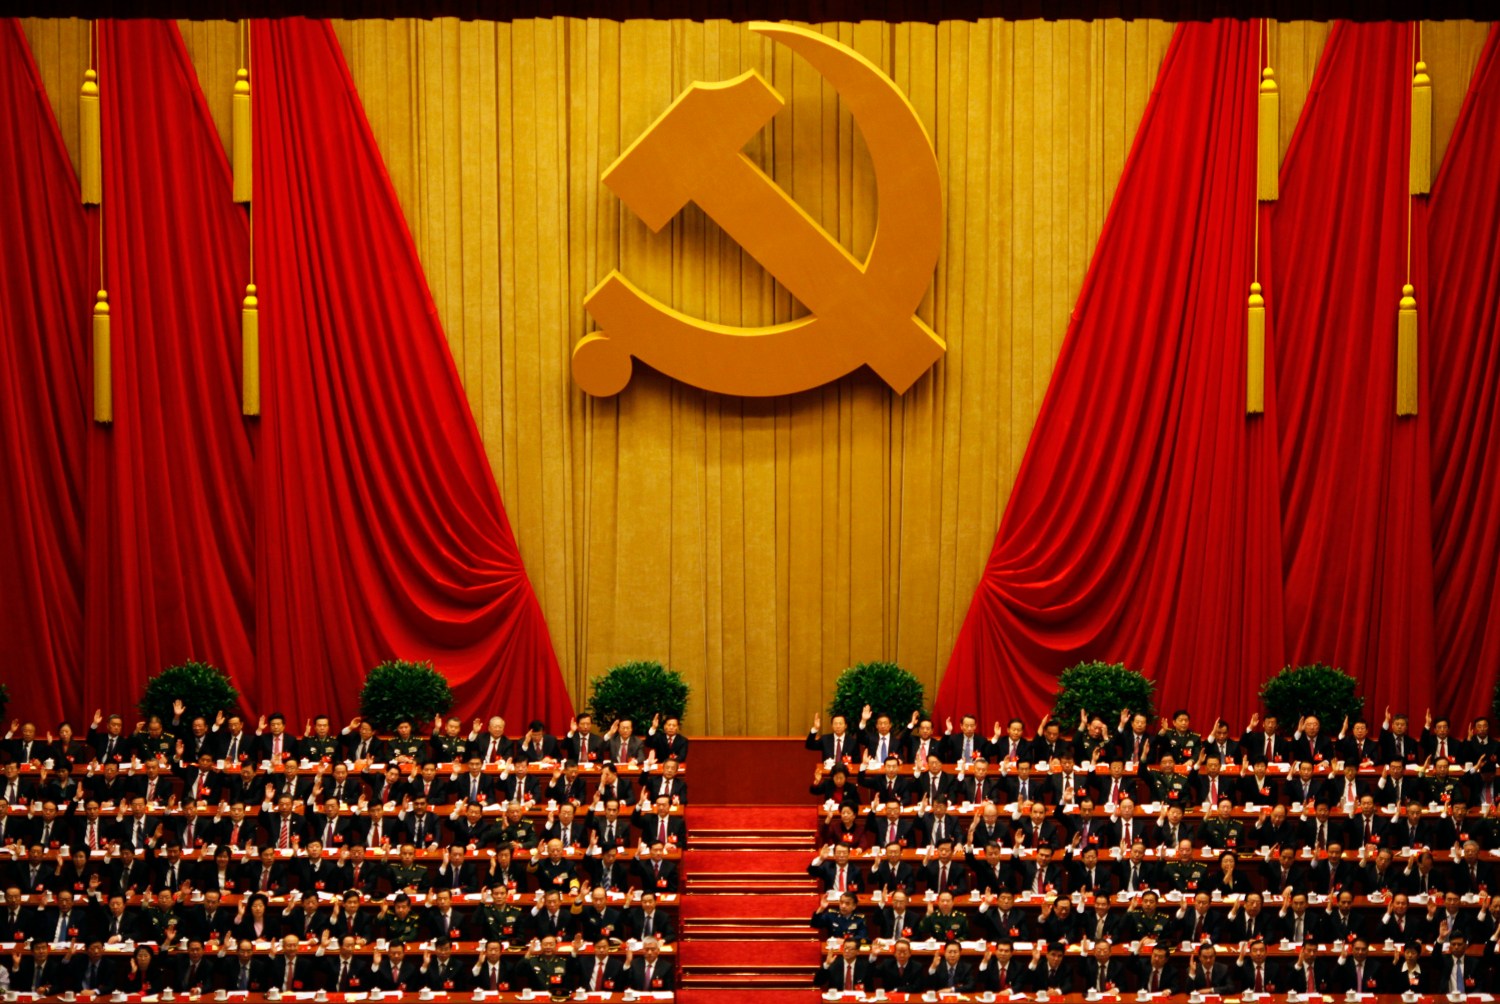 A general view shows delegates raising their hands as they take a vote at the closing session of the 18th National Congress of the Communist Party of China at the Great Hall of the People in Beijing November 14, 2012. REUTERS/Carlos Barria (CHINA - Tags: POLITICS) - RTR3ADEO